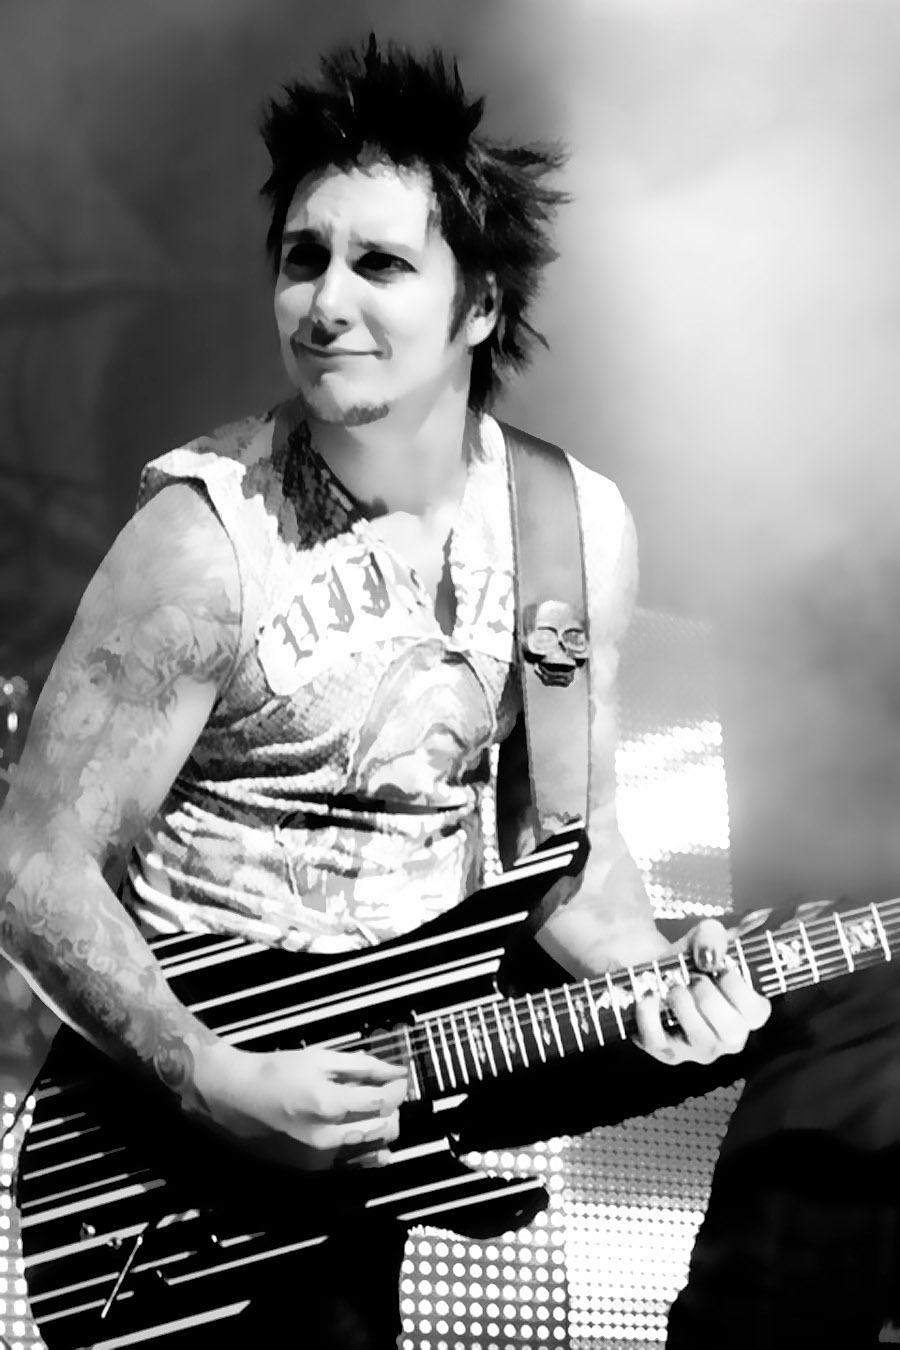 Synyster.